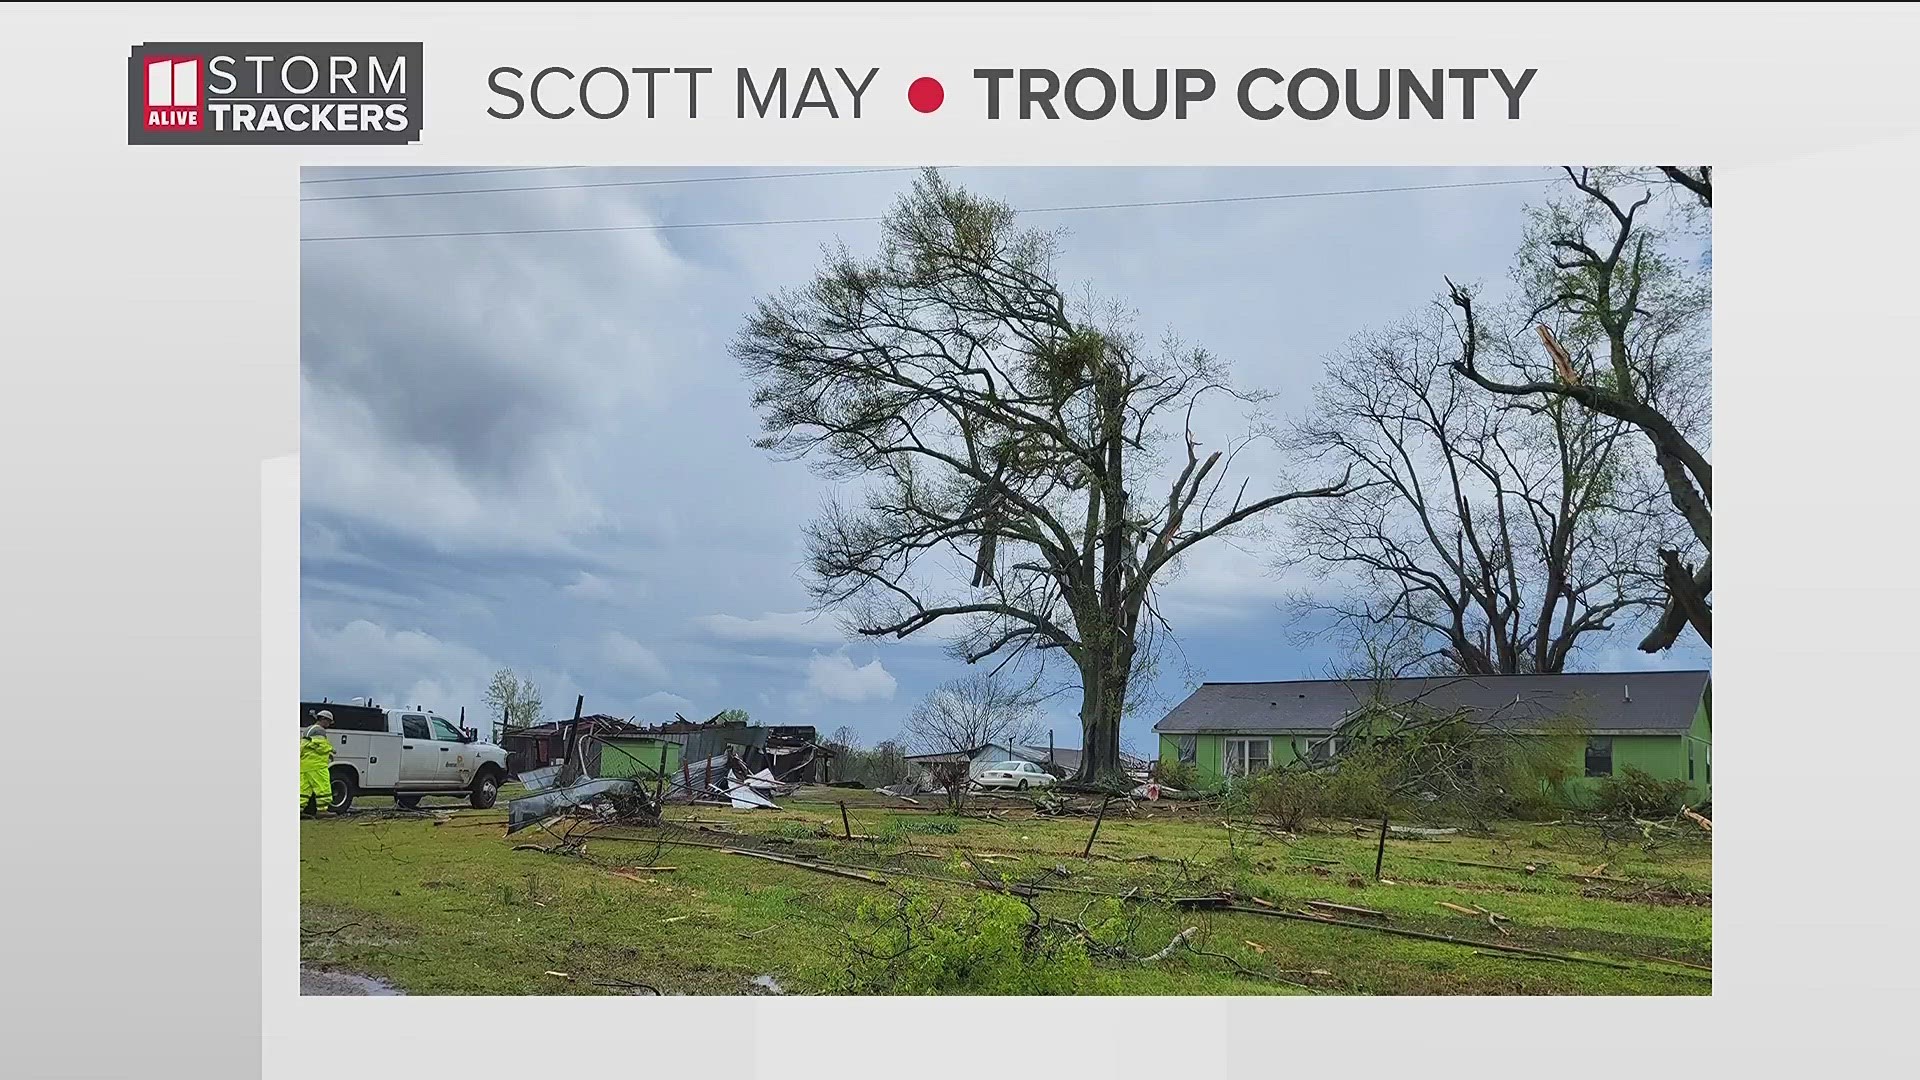 Chaos ensued in Troup County following a tornado touchdown in the area.